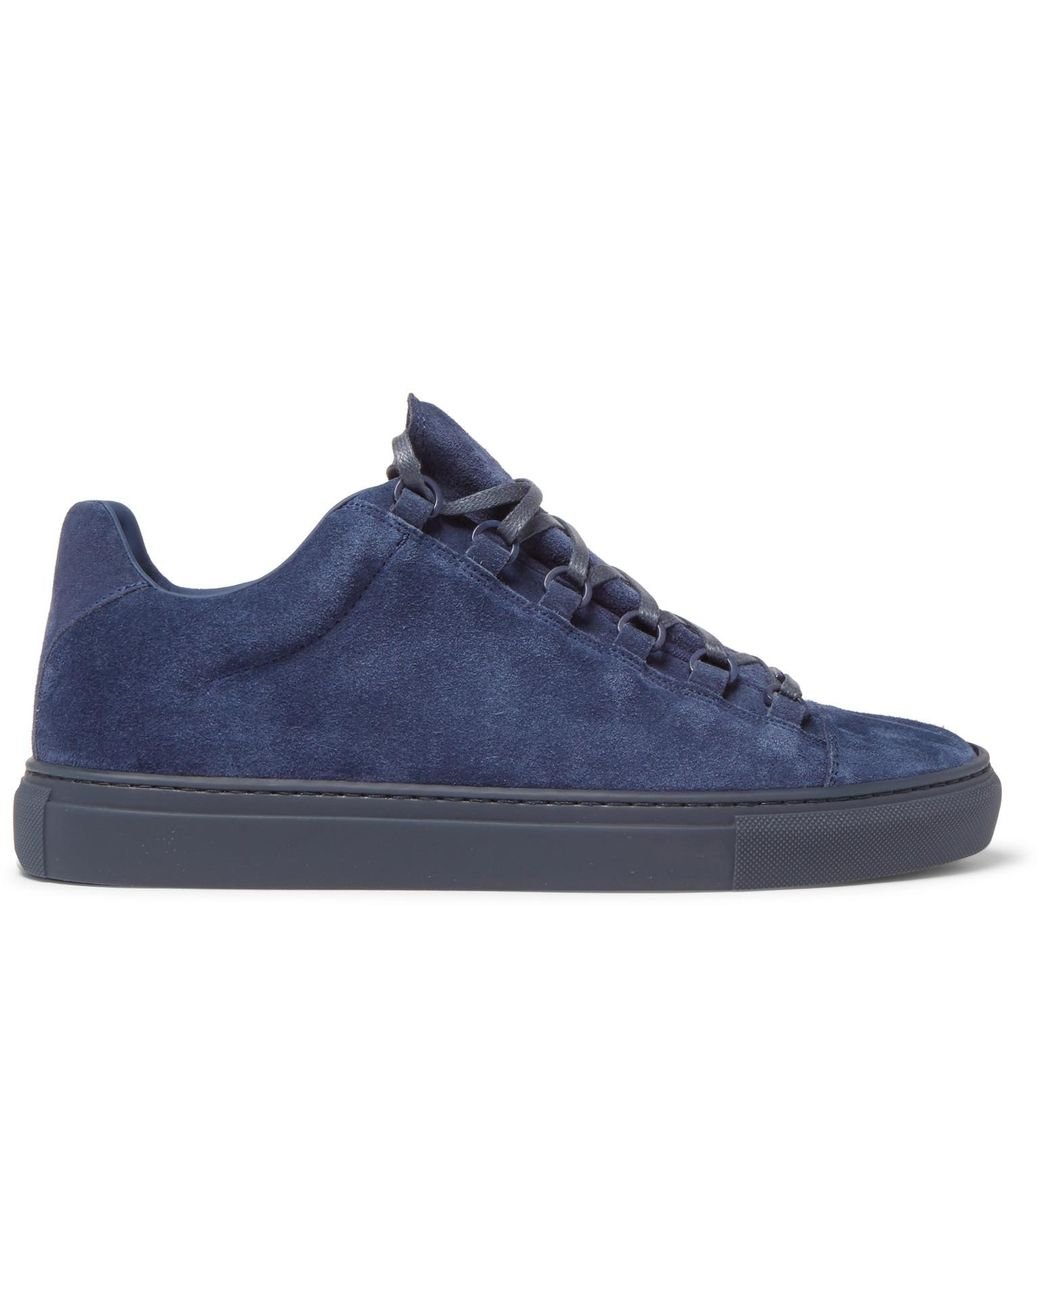 Balenciaga Suede Sneakers in Blue for Men Lyst